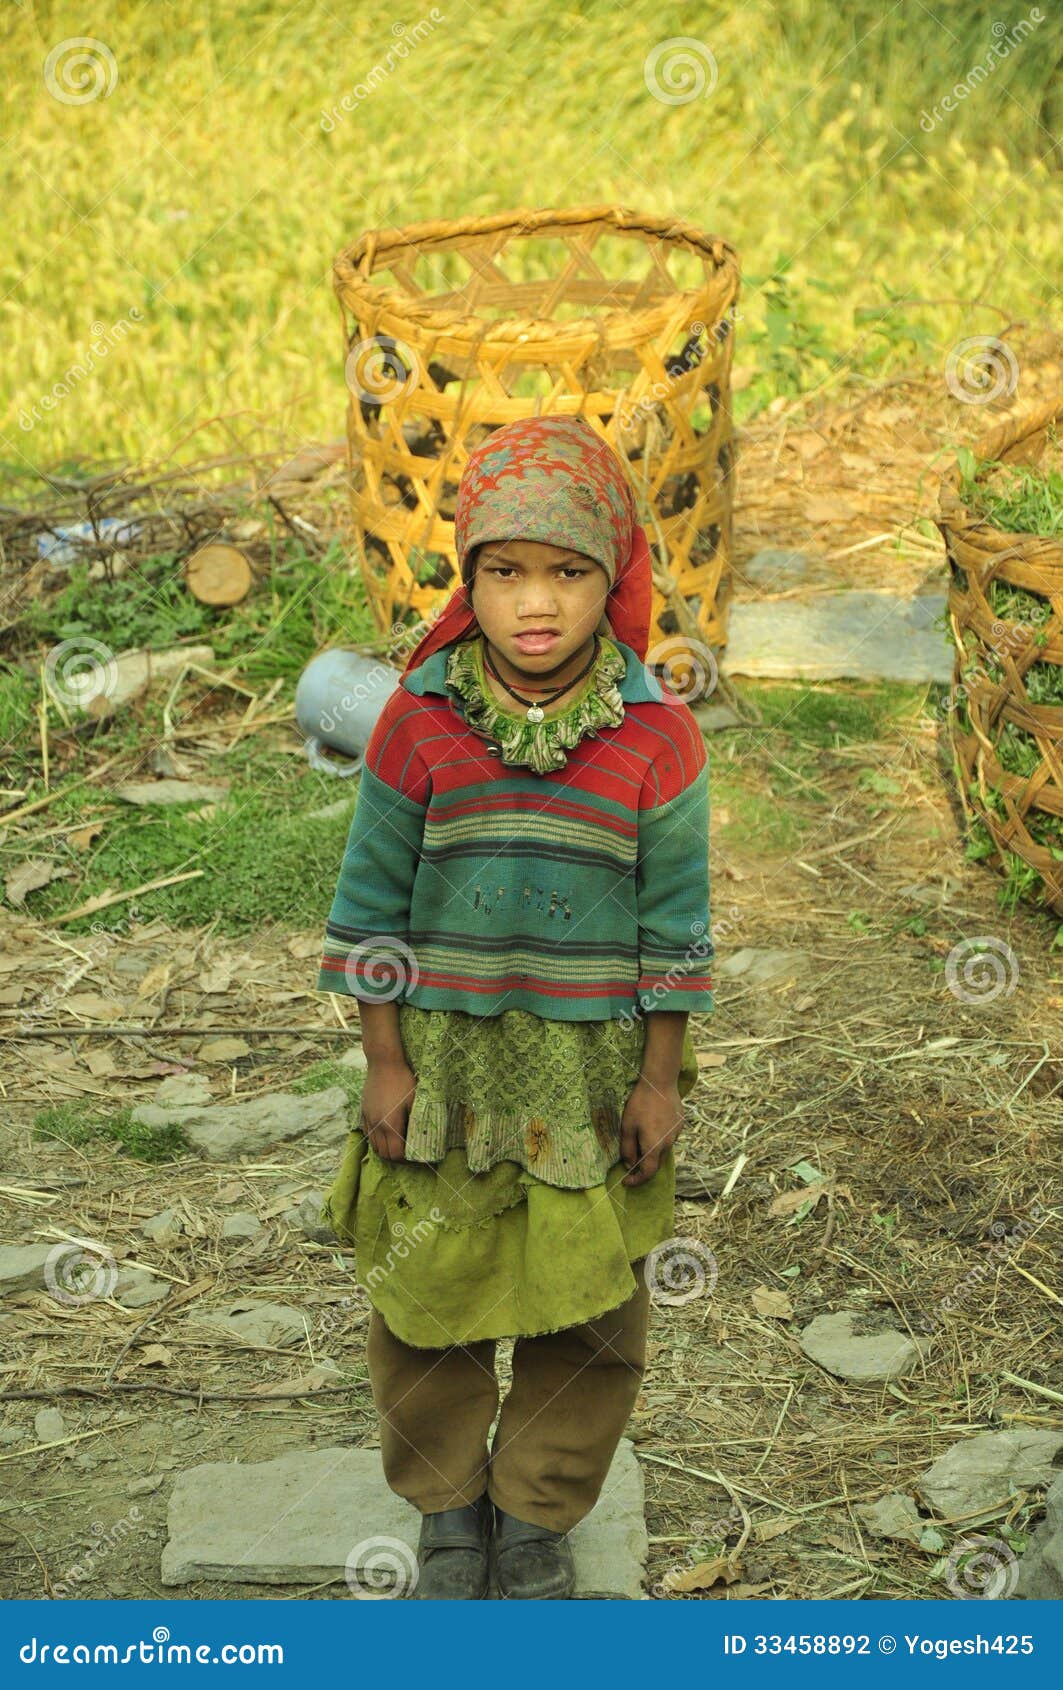 Indian worker girl. A small worker girl in Himalayas region of Uttarakhand state in India gathering woods and food in her basket